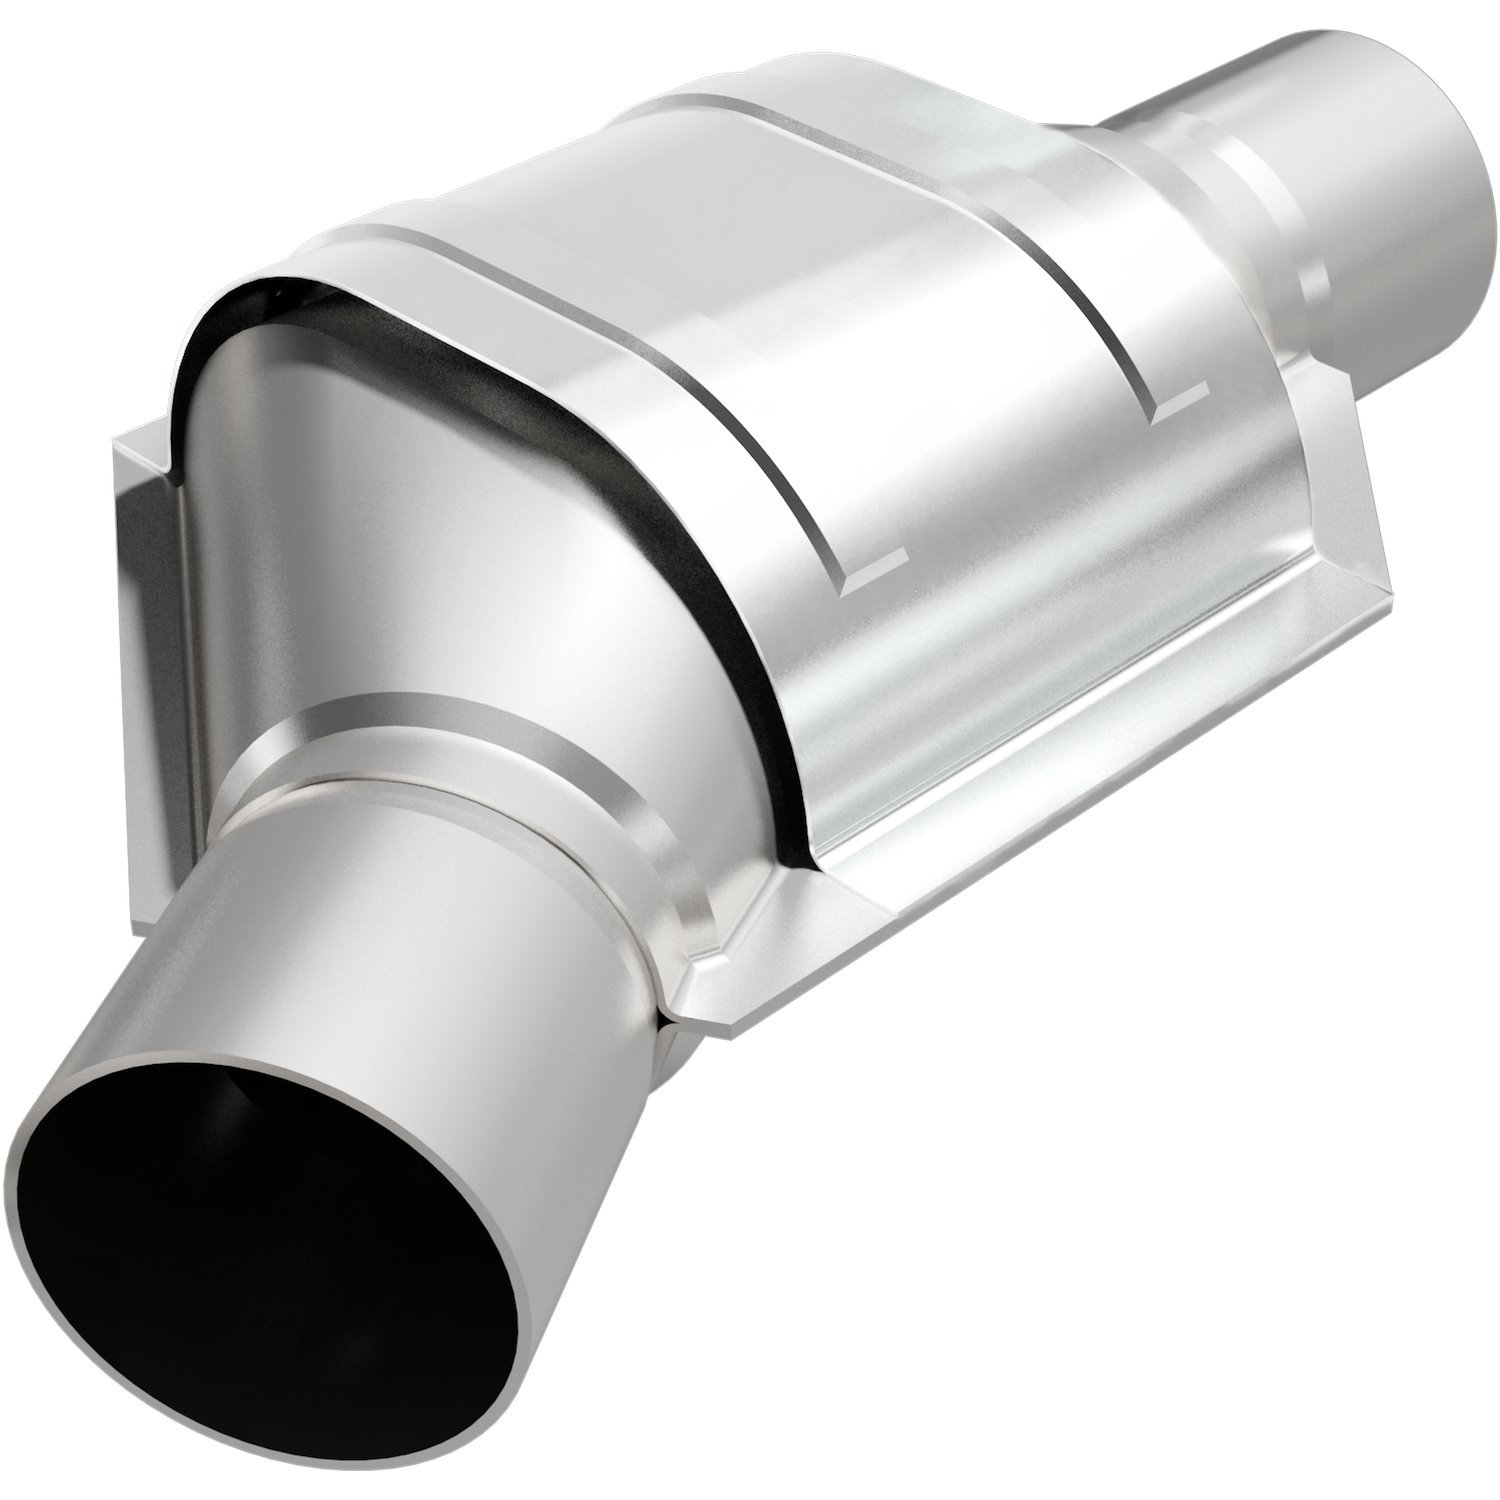 OBD-II 49-State Universal Catalytic Converter Body Shape: Angled Oval, Offset/Center